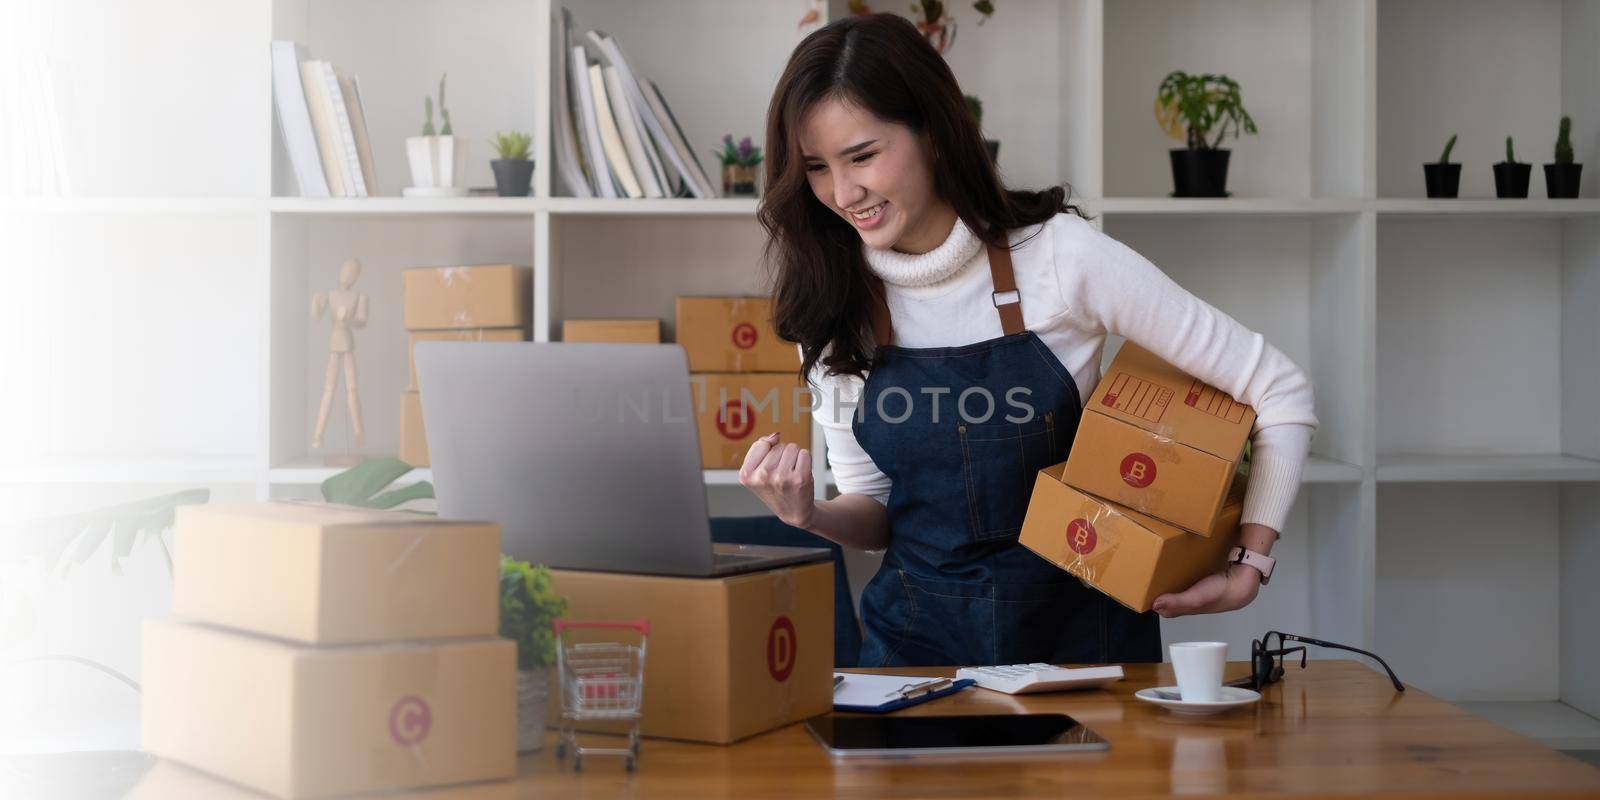 Business owner excite when got an order from her online shop. Successful SME entrepreneur concept. by itchaznong